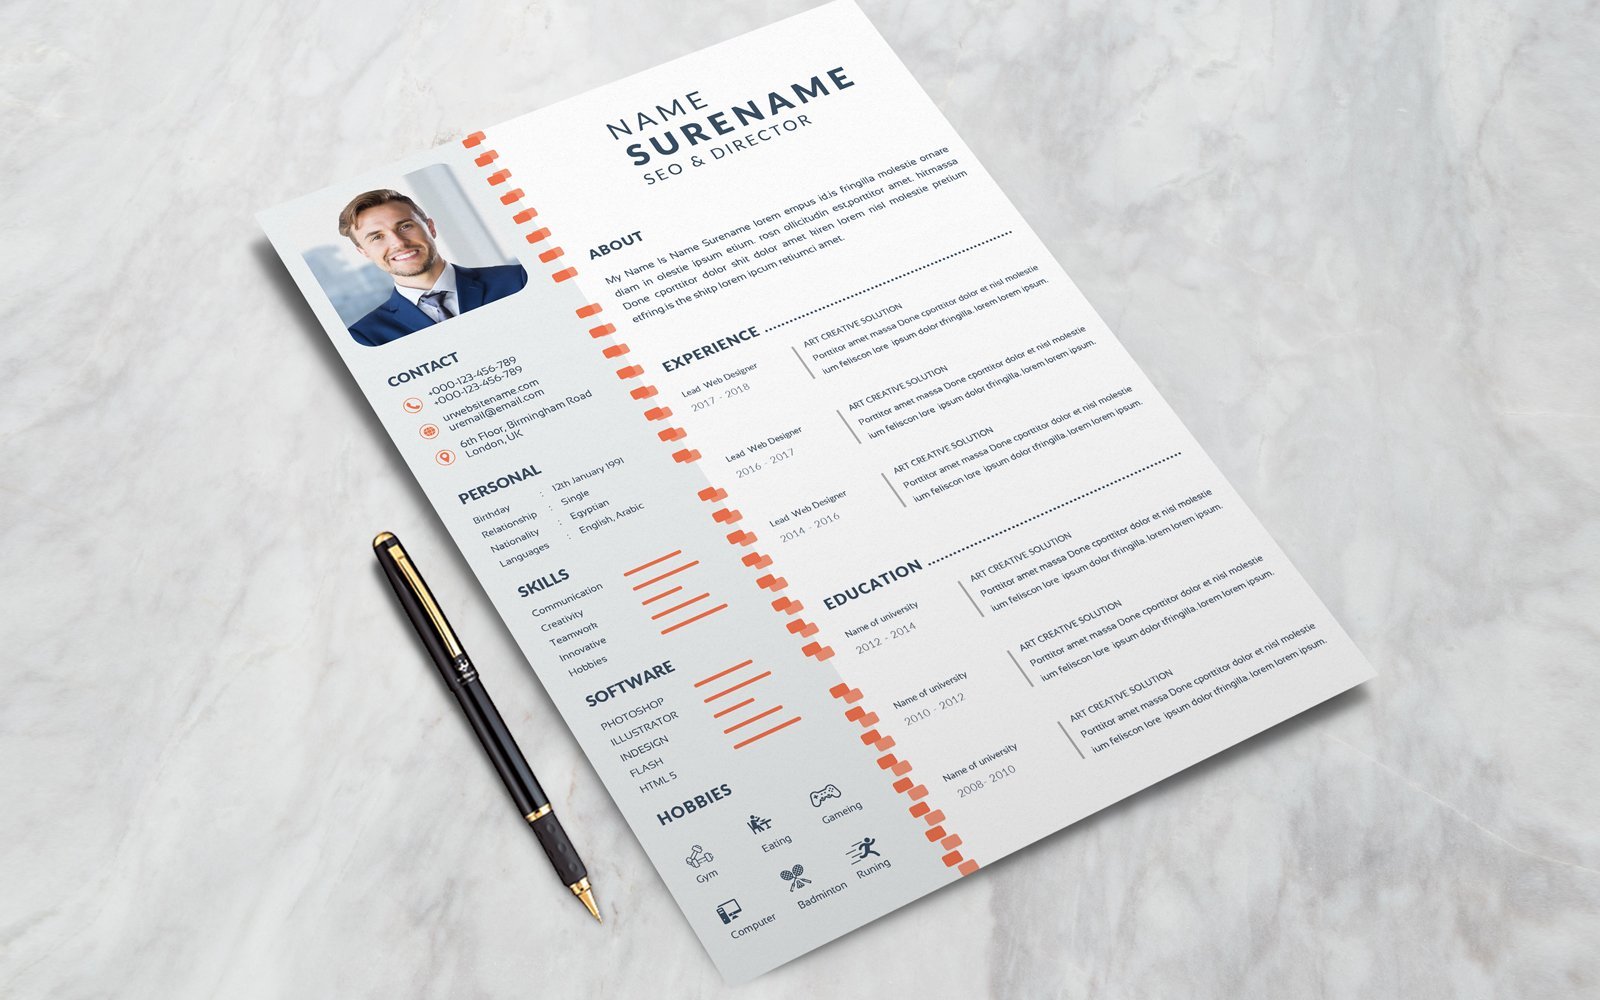 Template #381414 Resume Resume Webdesign Template - Logo template Preview